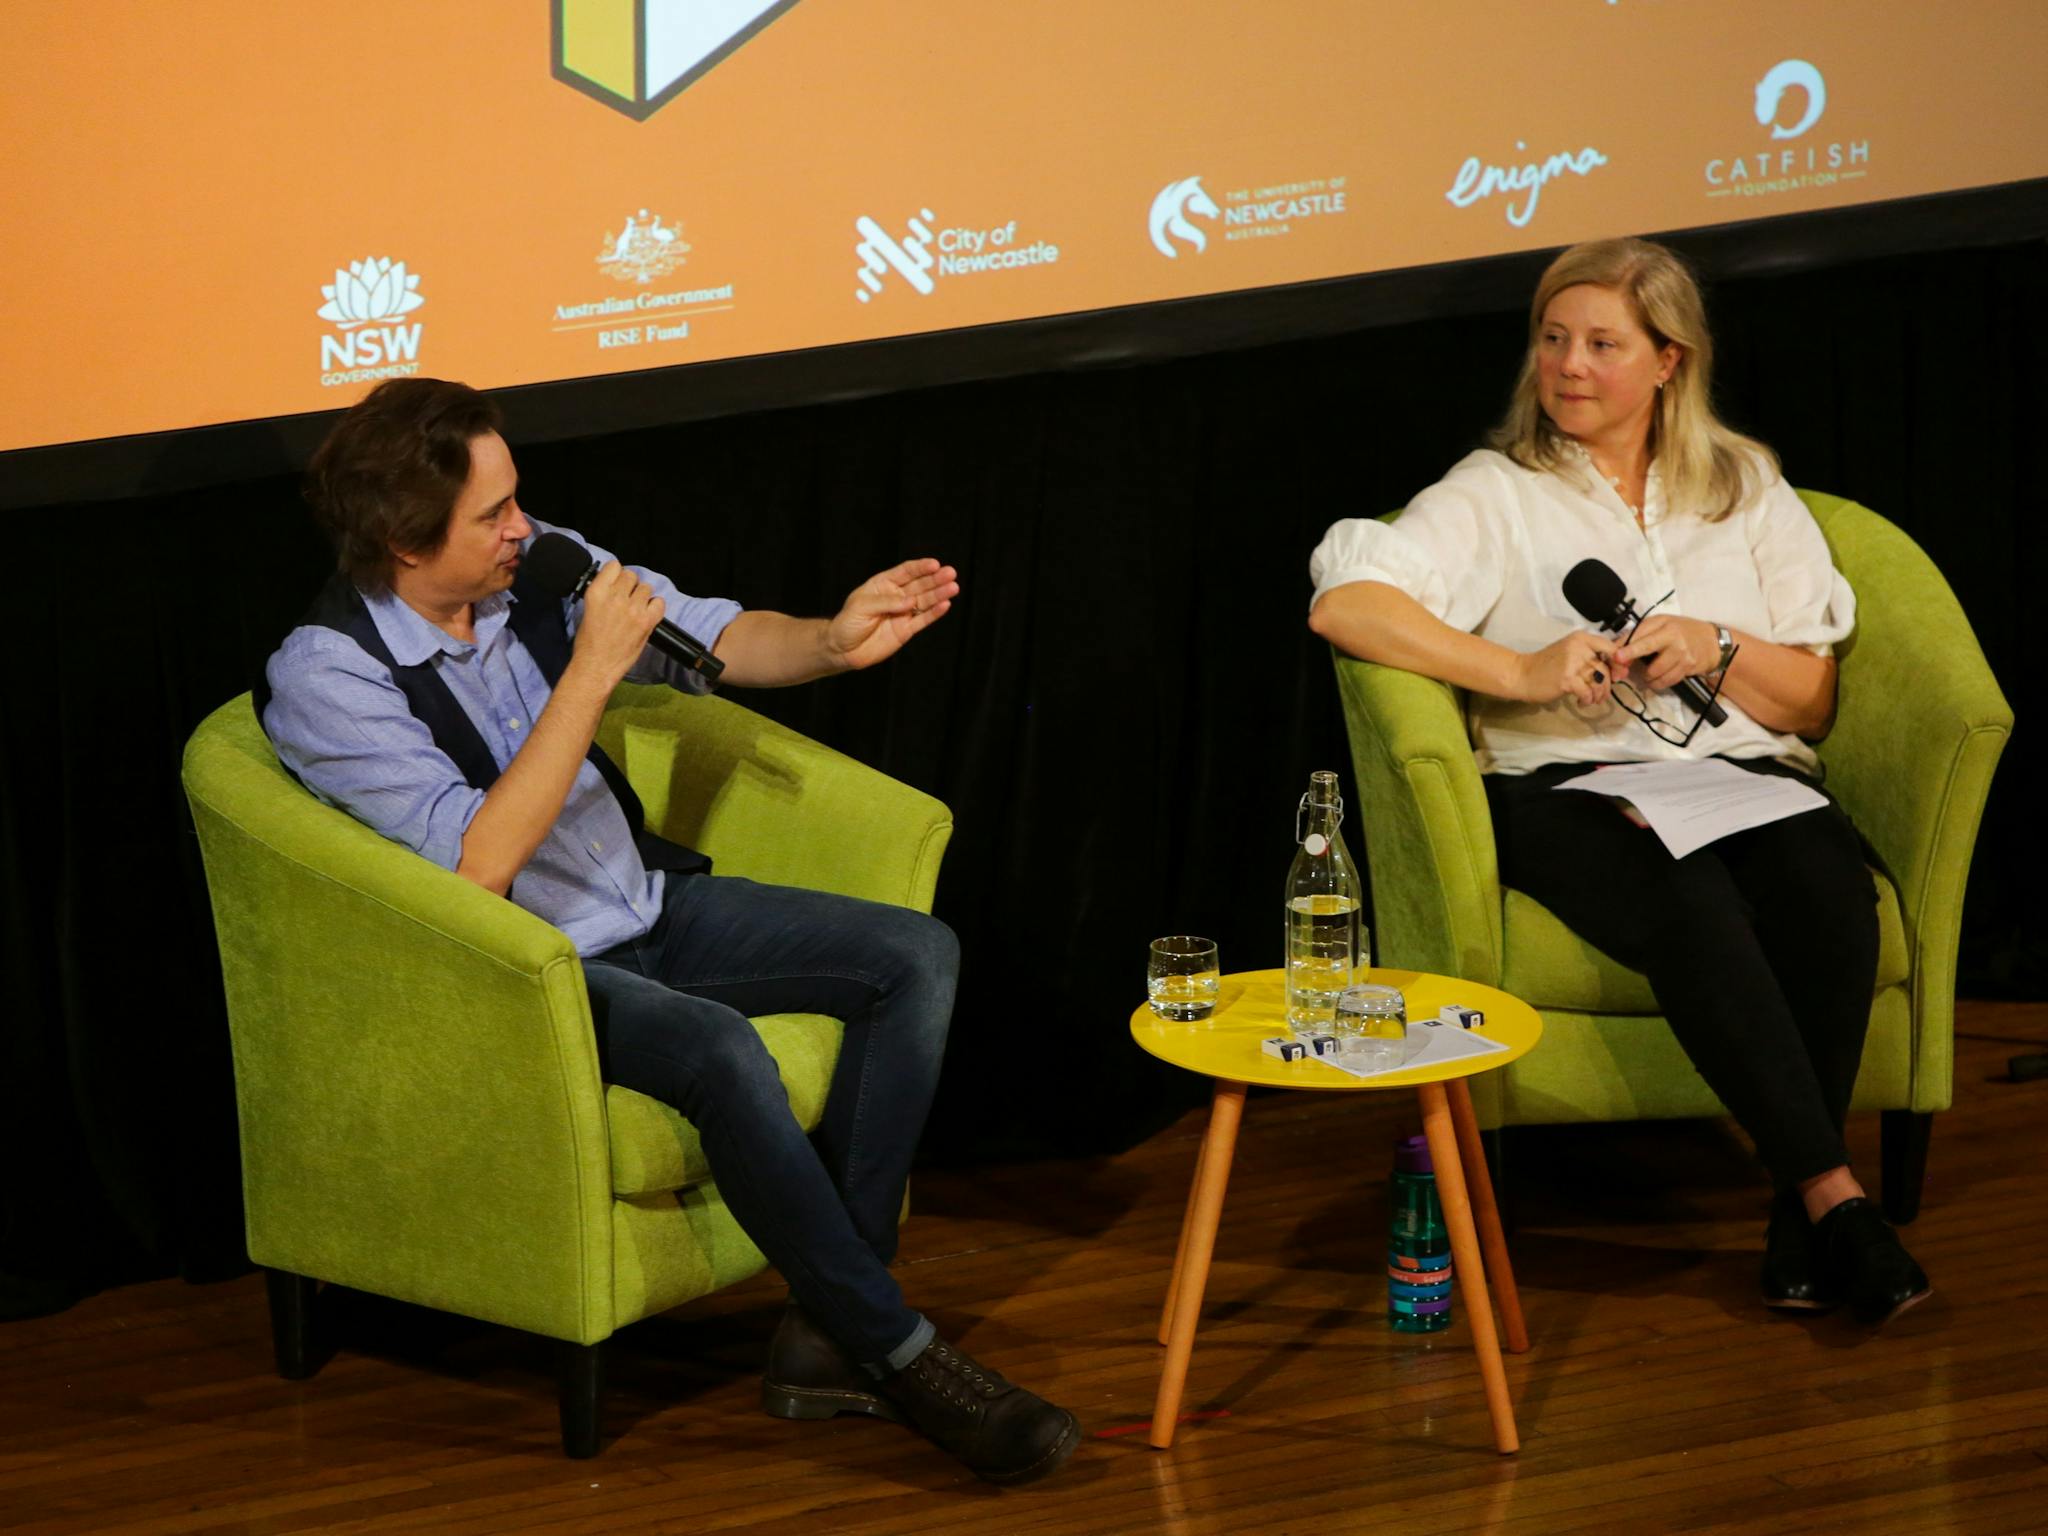 Author Trent Dalton is holding a microphone and gesturing to interviewer Rosemarie Milsom.